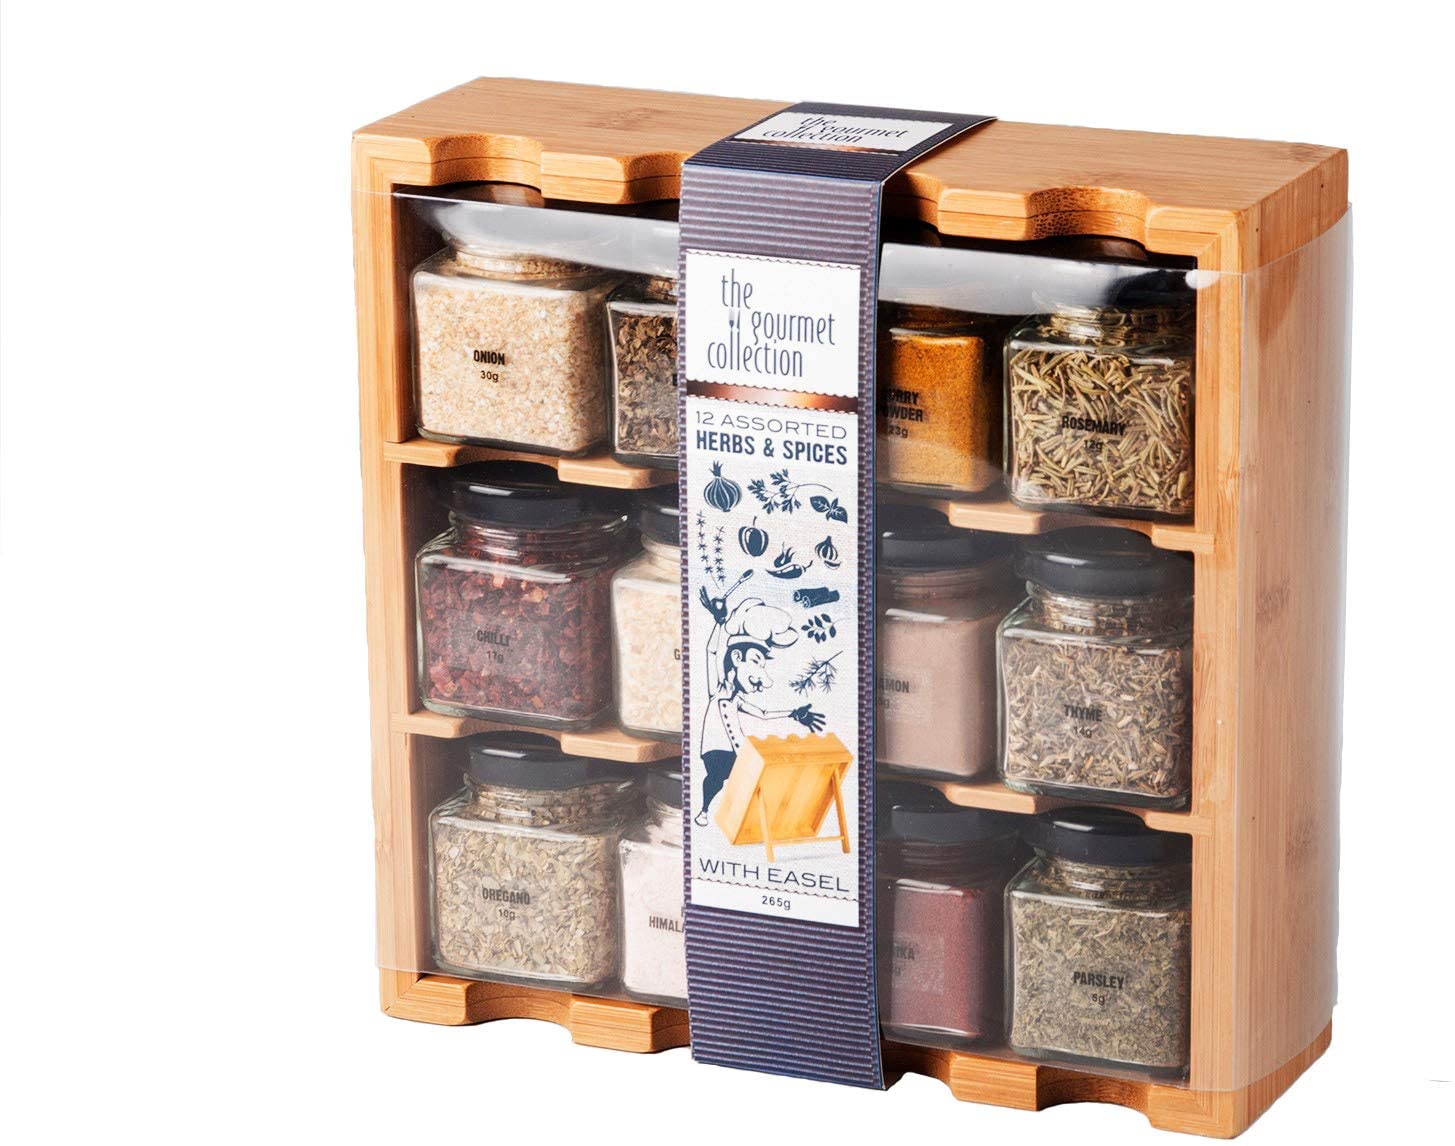 The Gourmet Collection spice rack